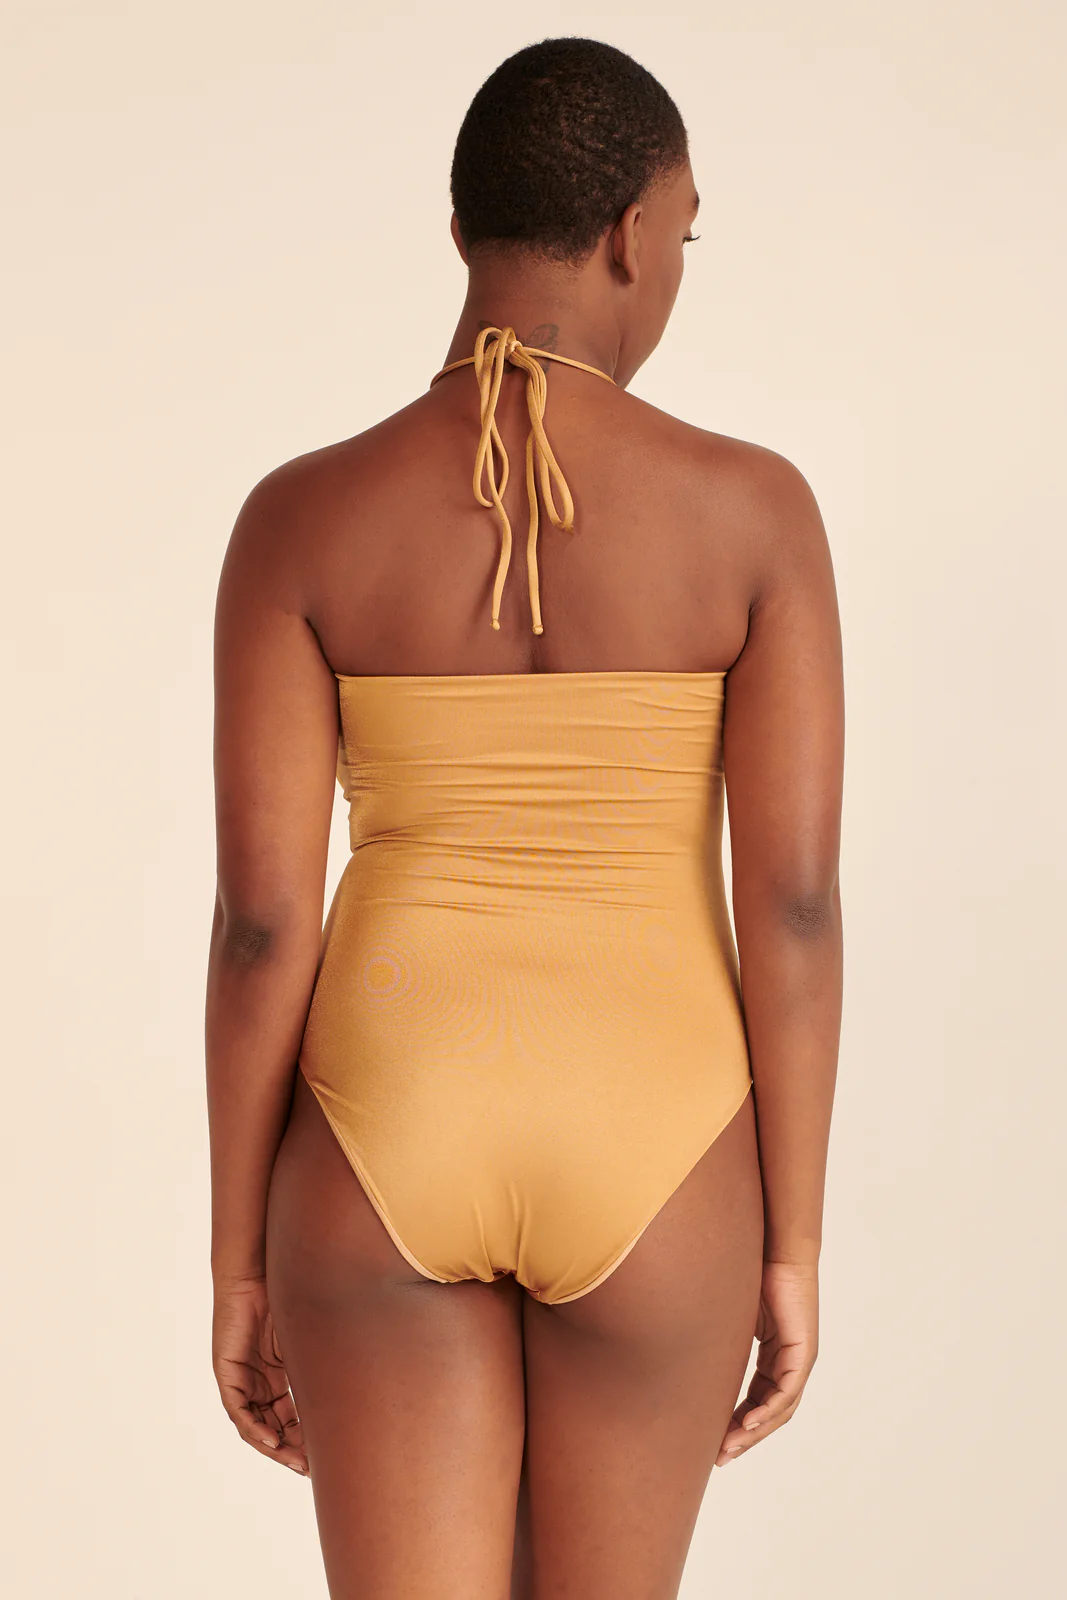 Maygel Coronel Solana Swimsuit in Champagne available at The New Trend Australia.